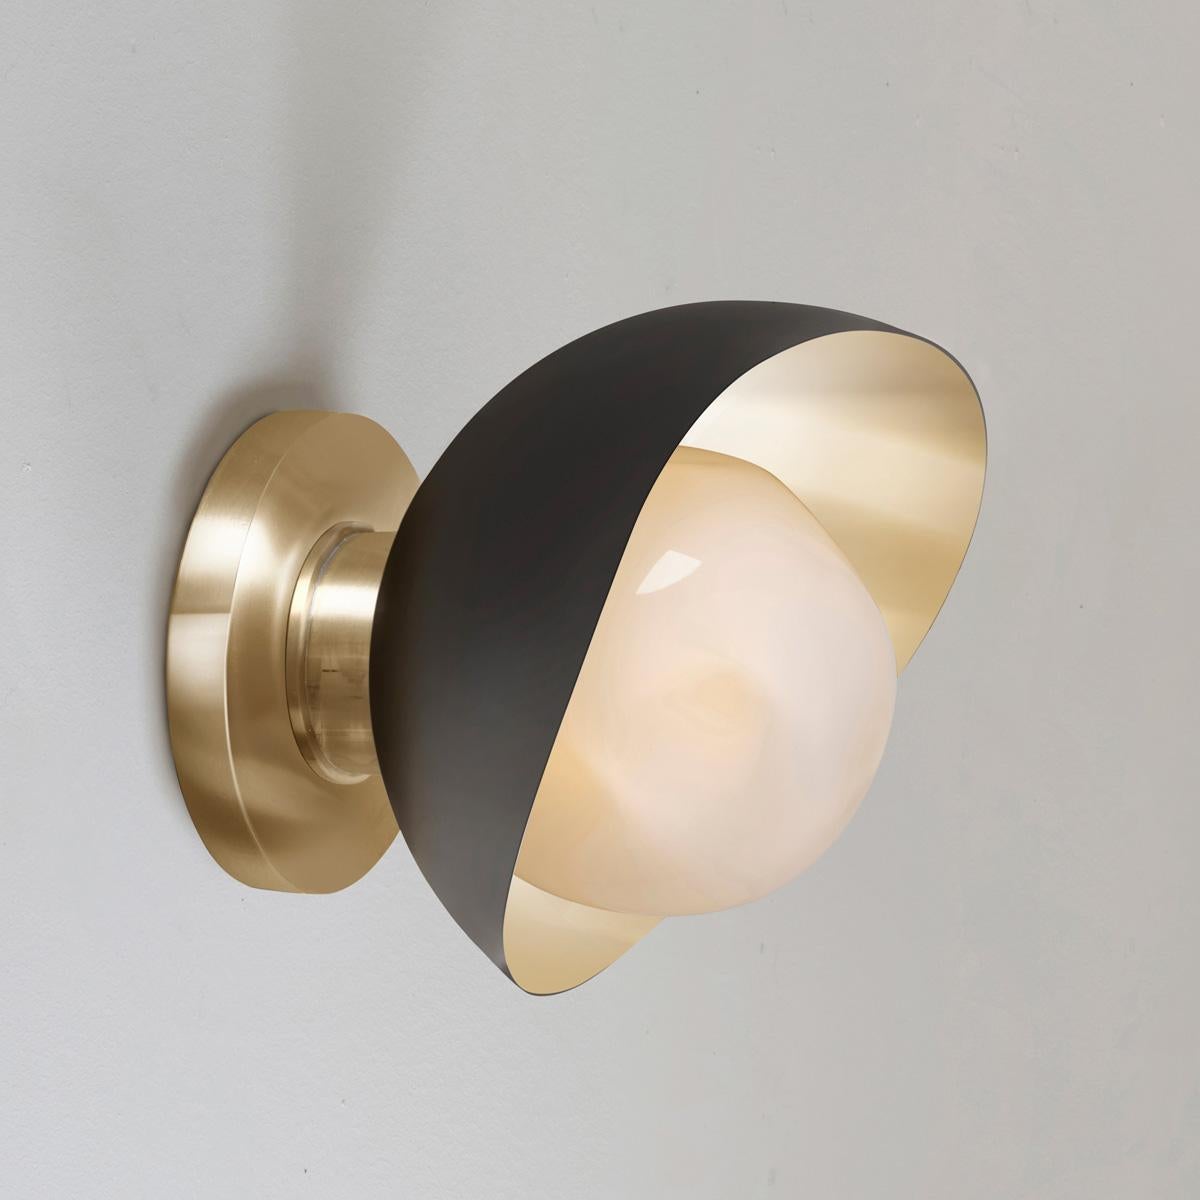 Perla Mini Wall Light by Gaspare Asaro. Sand White and Satin Brass Finish For Sale 1